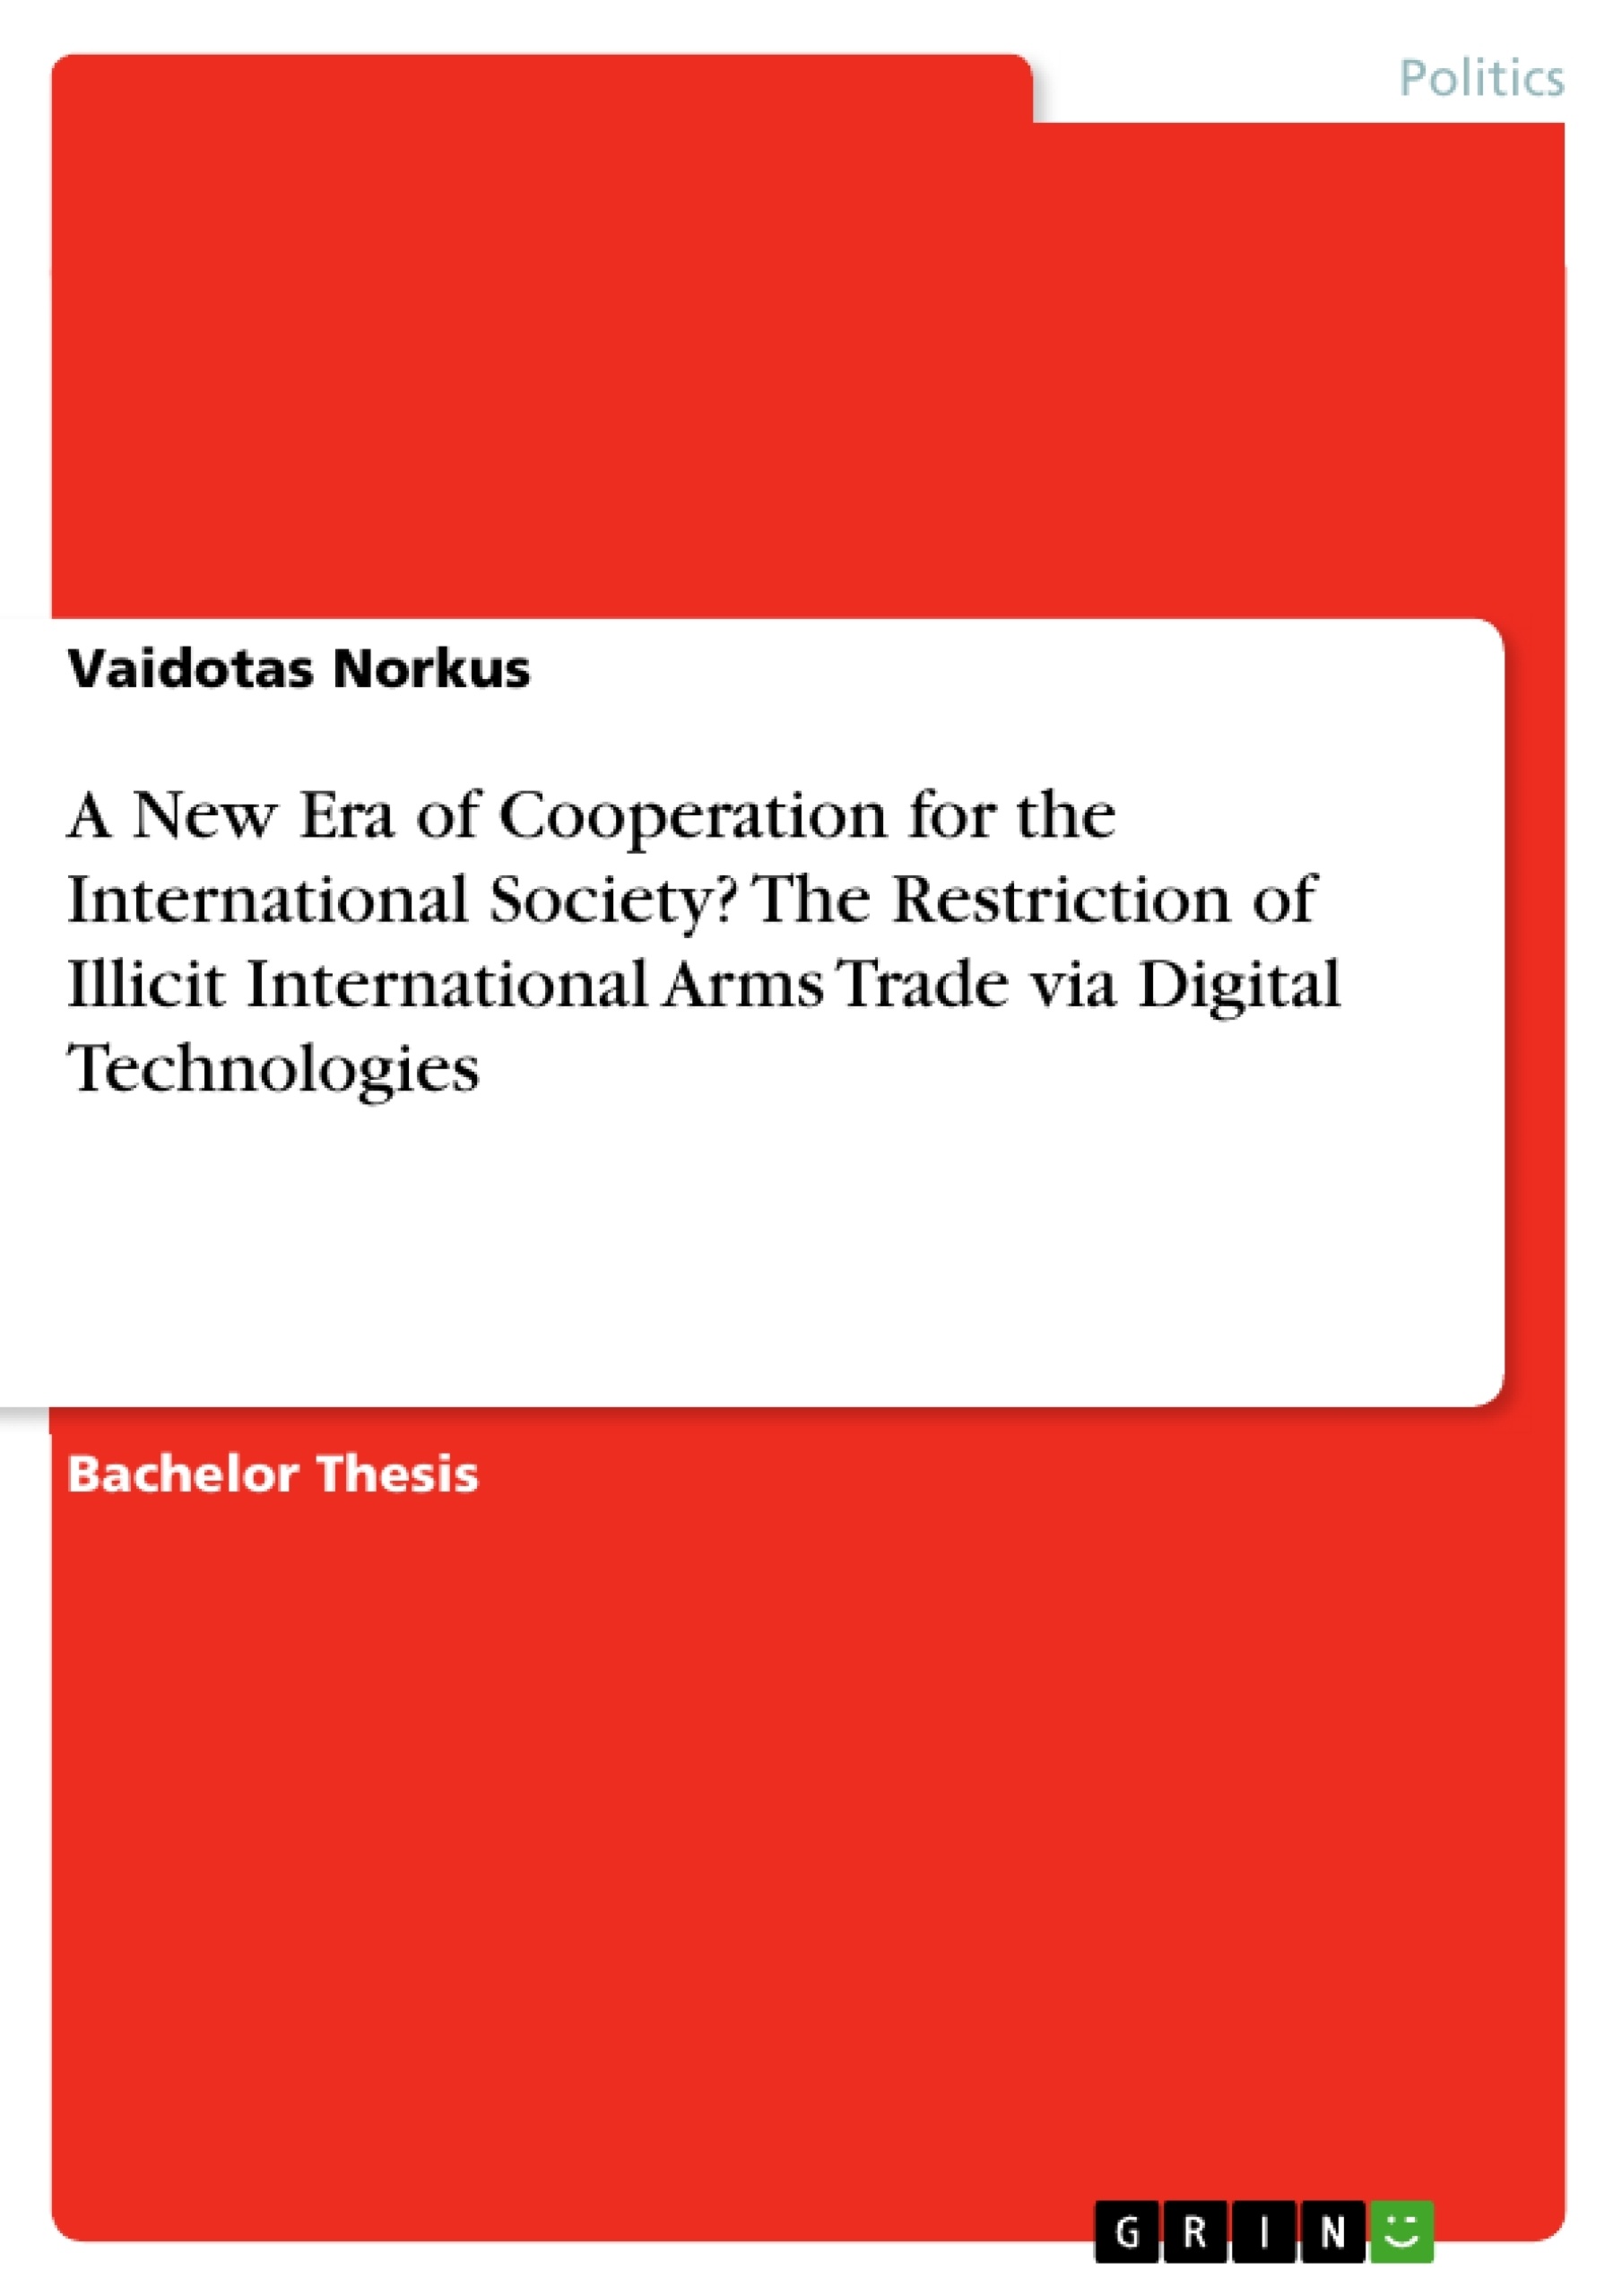 Titre: A New Era of Cooperation for the International Society? The Restriction of Illicit International Arms Trade via Digital Technologies